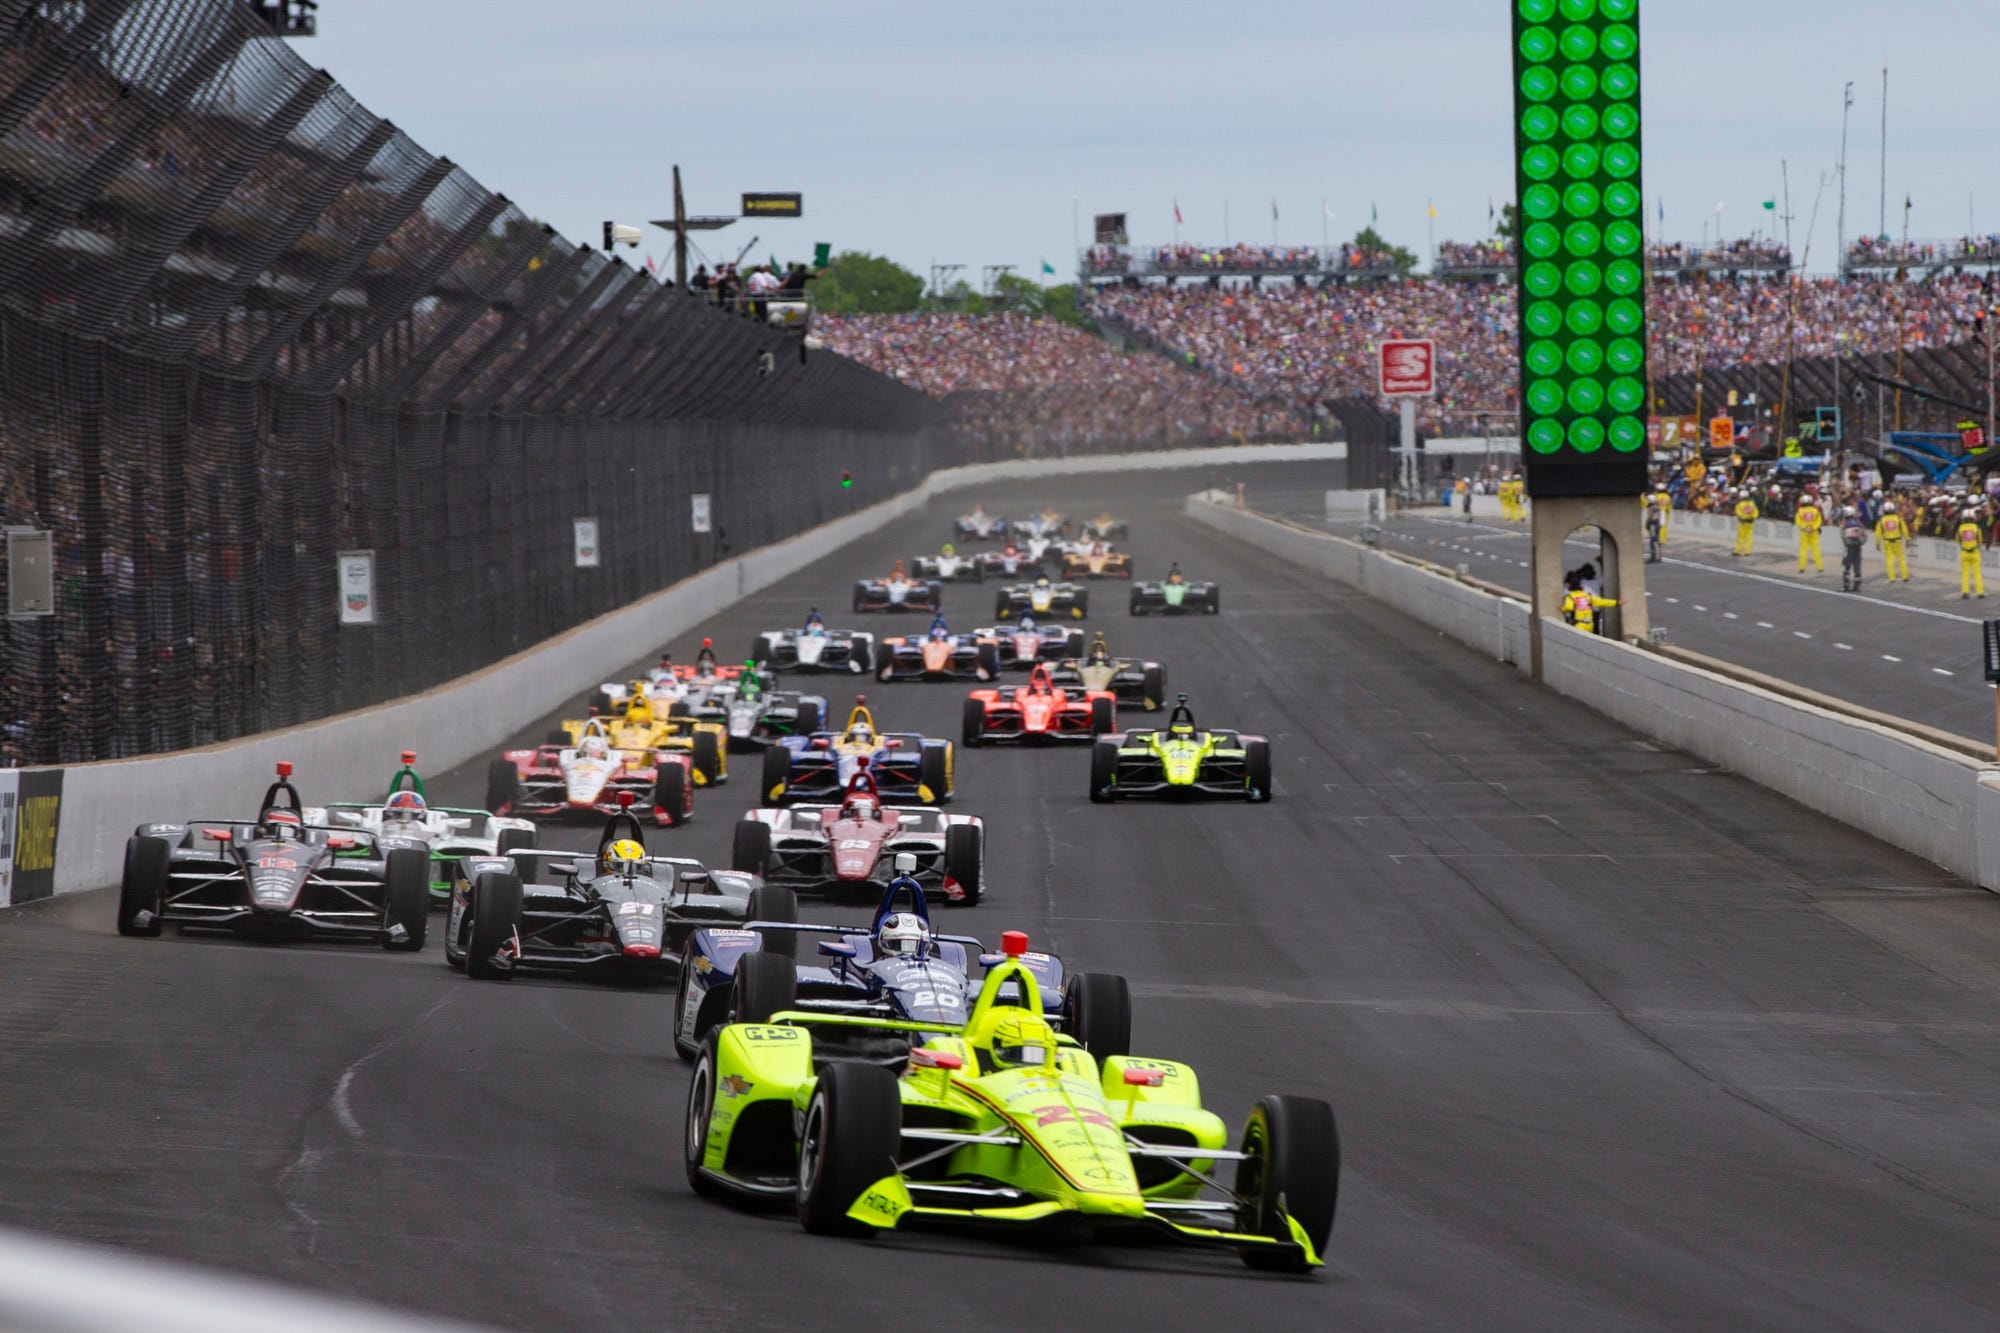 2021 Indy 500: Start time lineup, TV streaming schedule and more for the 105th running Indianapolis 